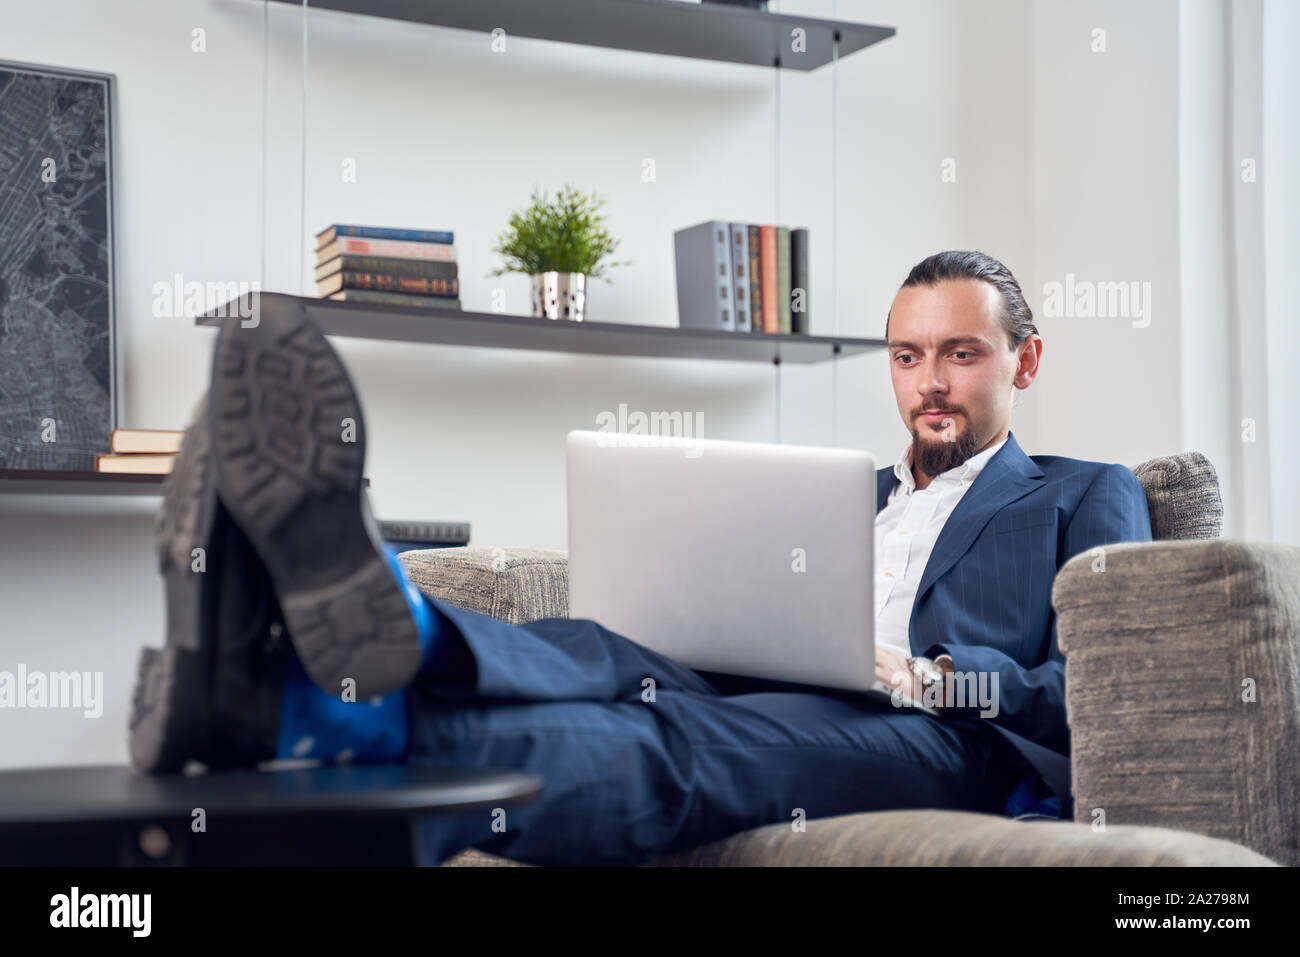 Image of serious businessman with laptop sitting on sofa in room during day Stock Photo